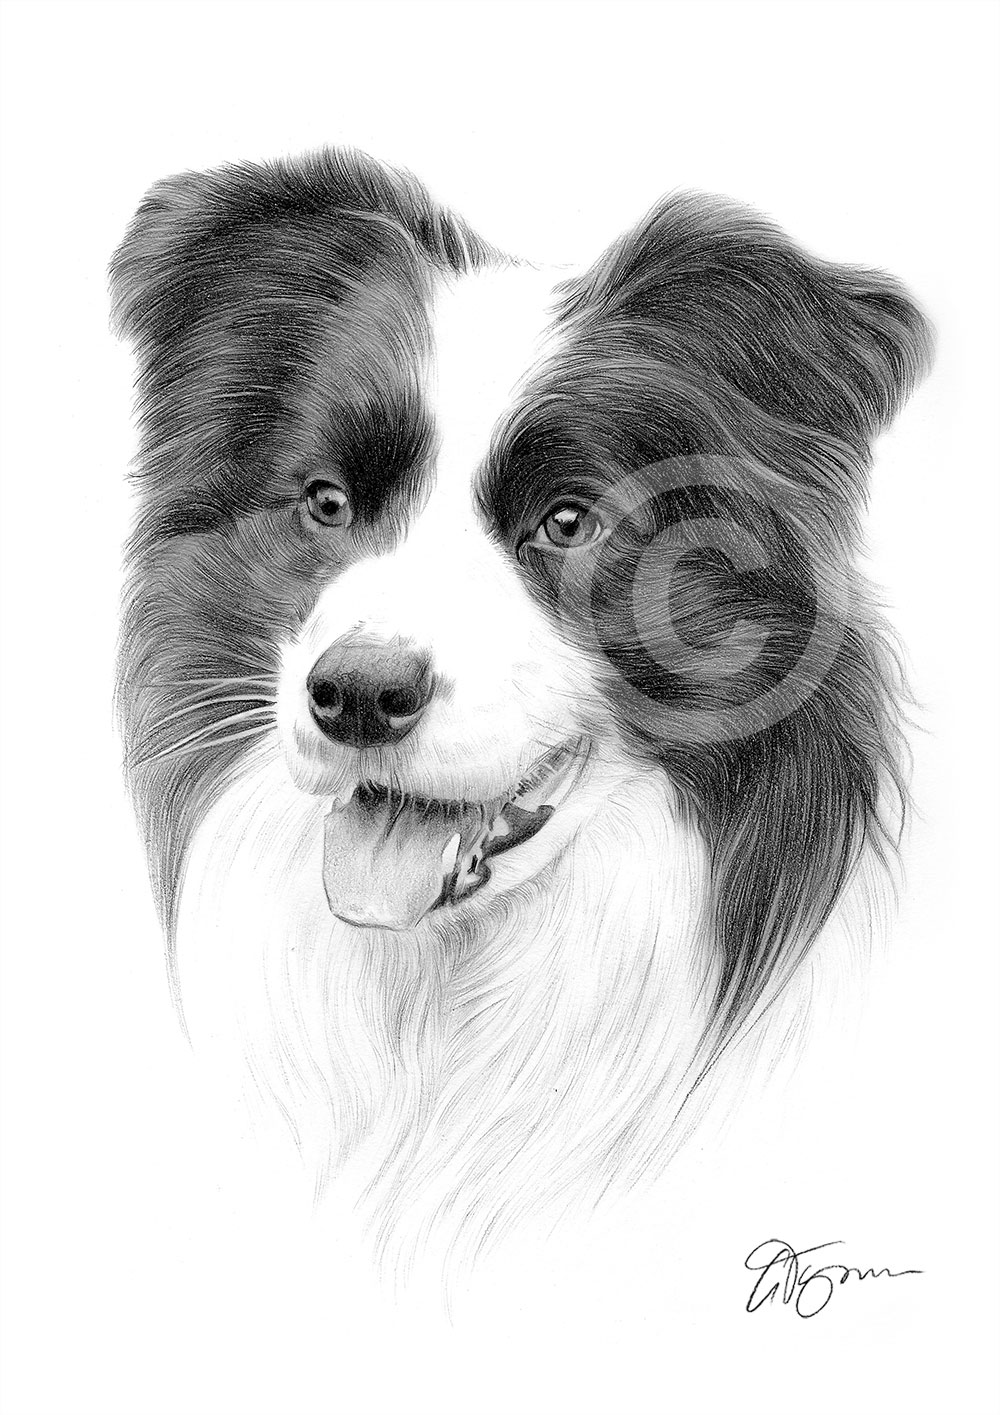 BORDER COLLIE pencil drawing art print A3 / A4 sizes signed by artist